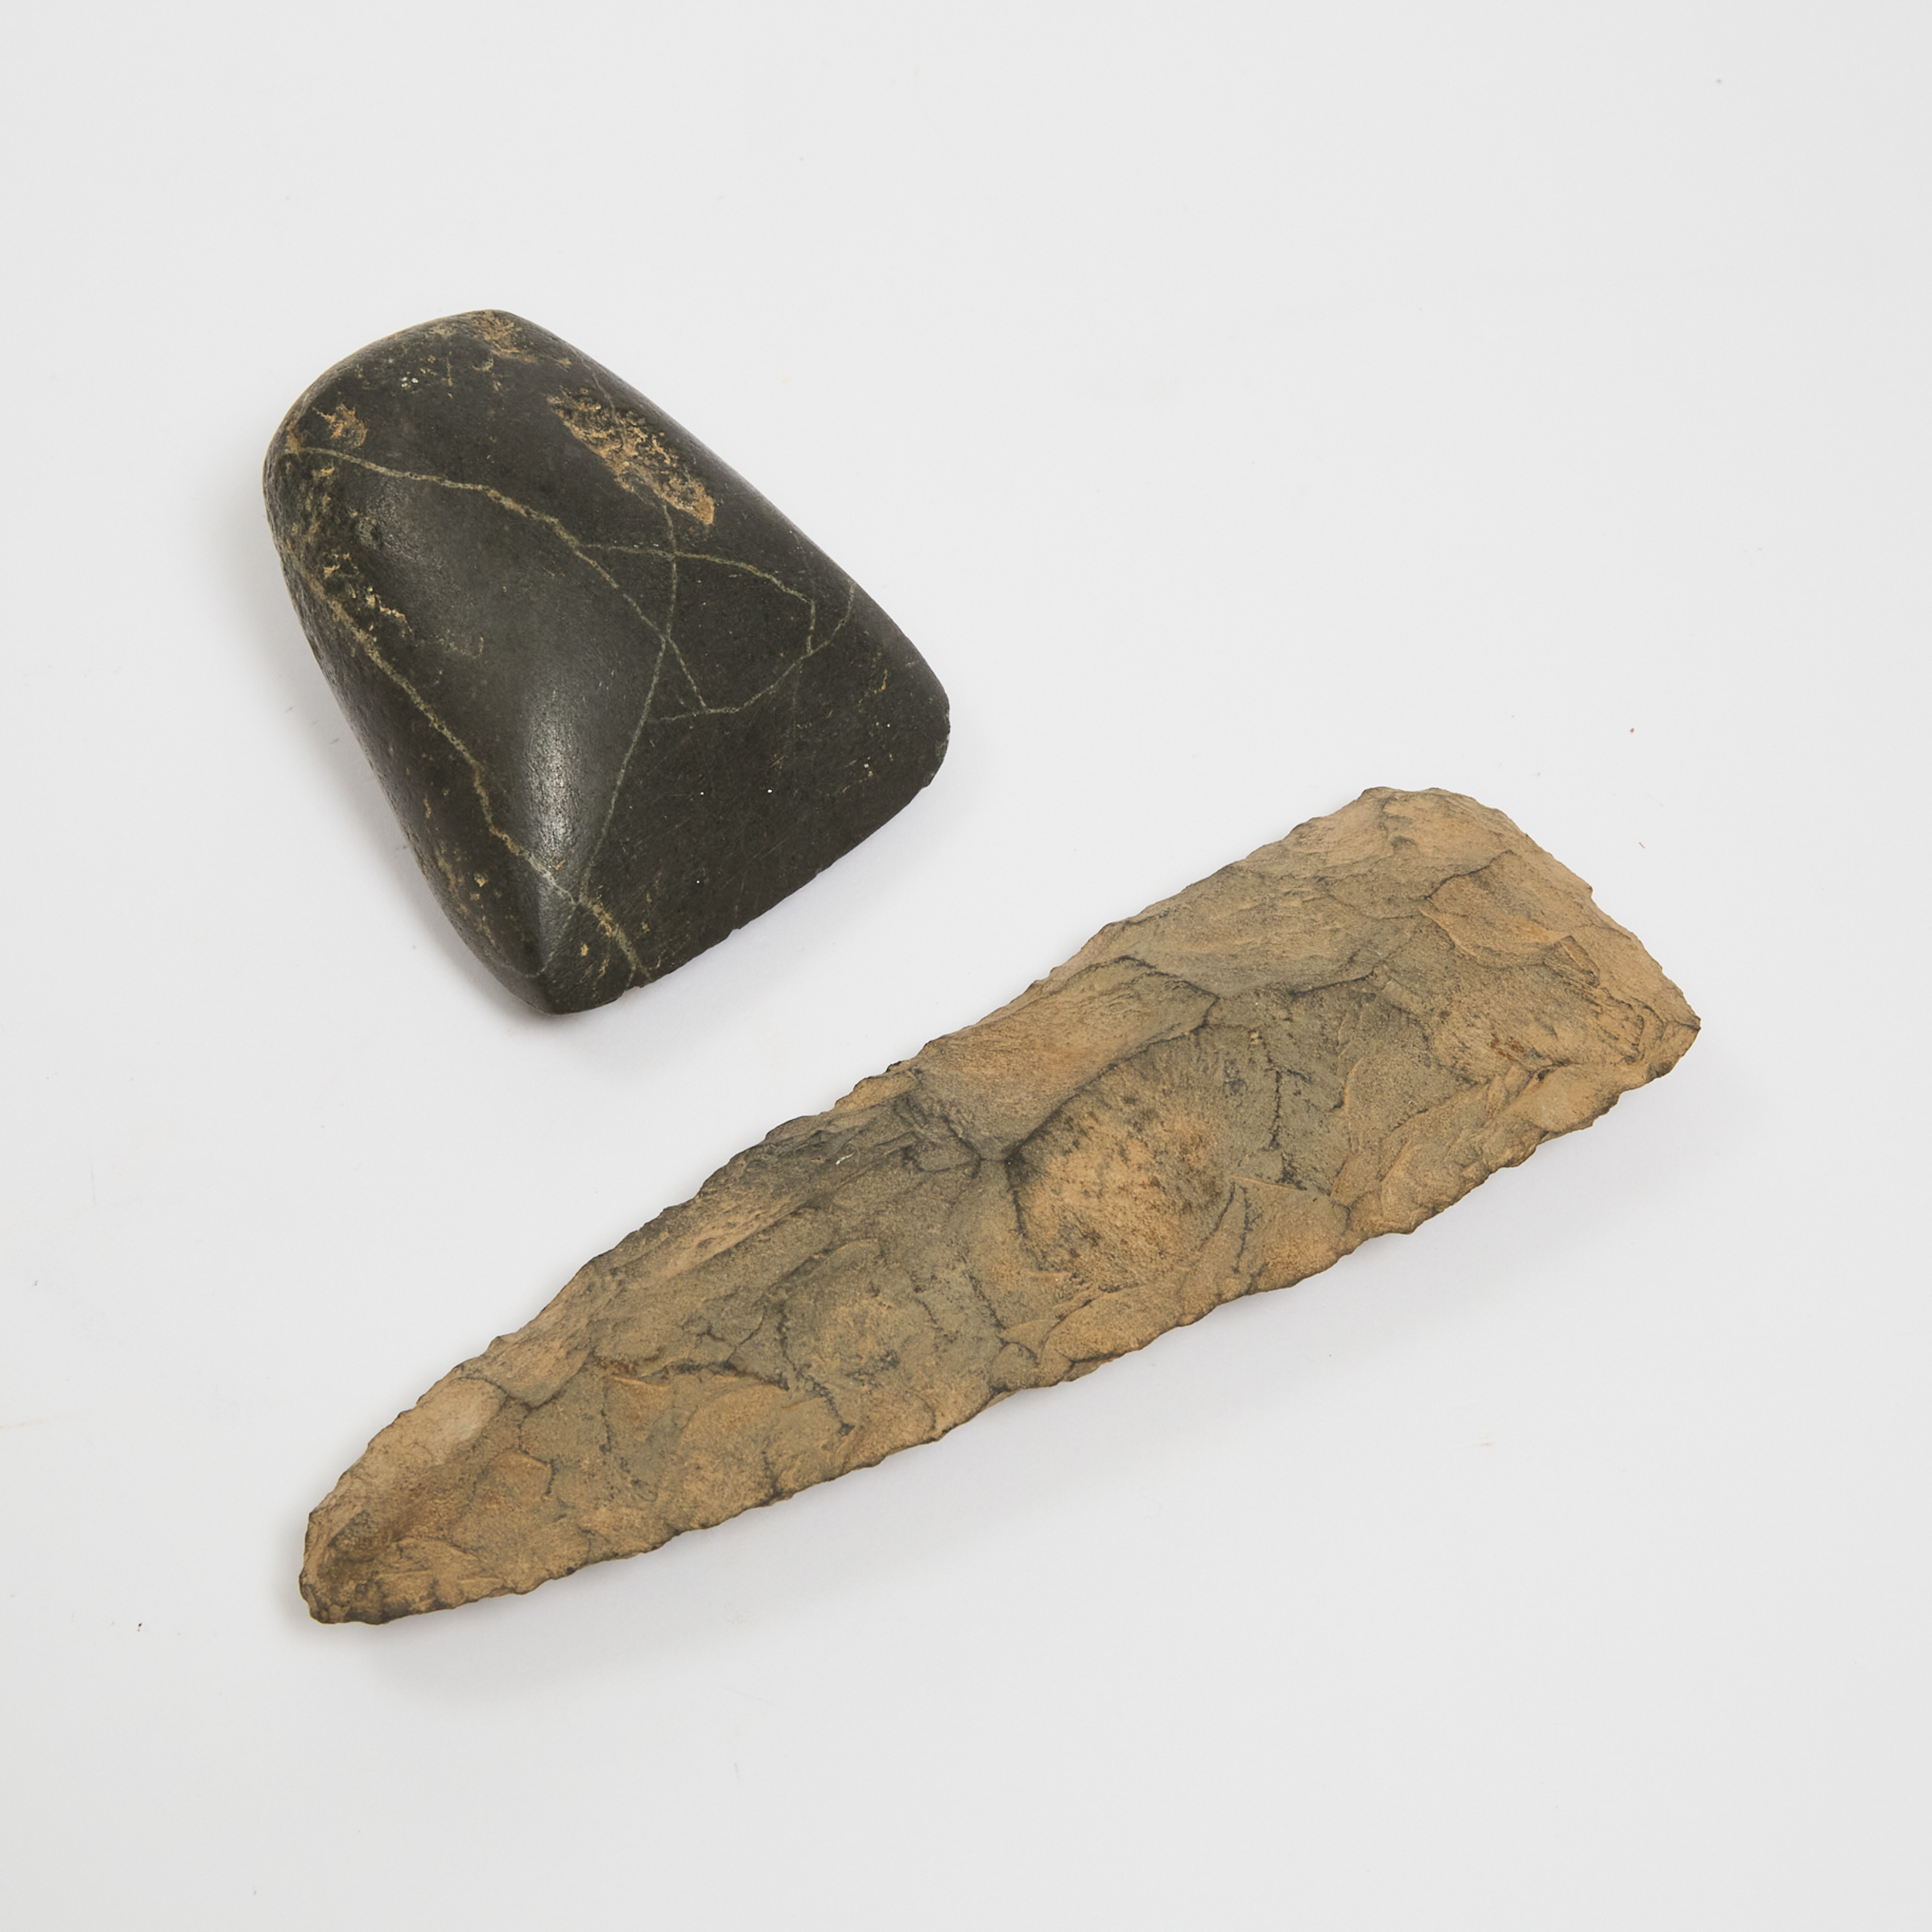 Two Pre-Columbian Stone Axe Heads (Celts), Costa Rica